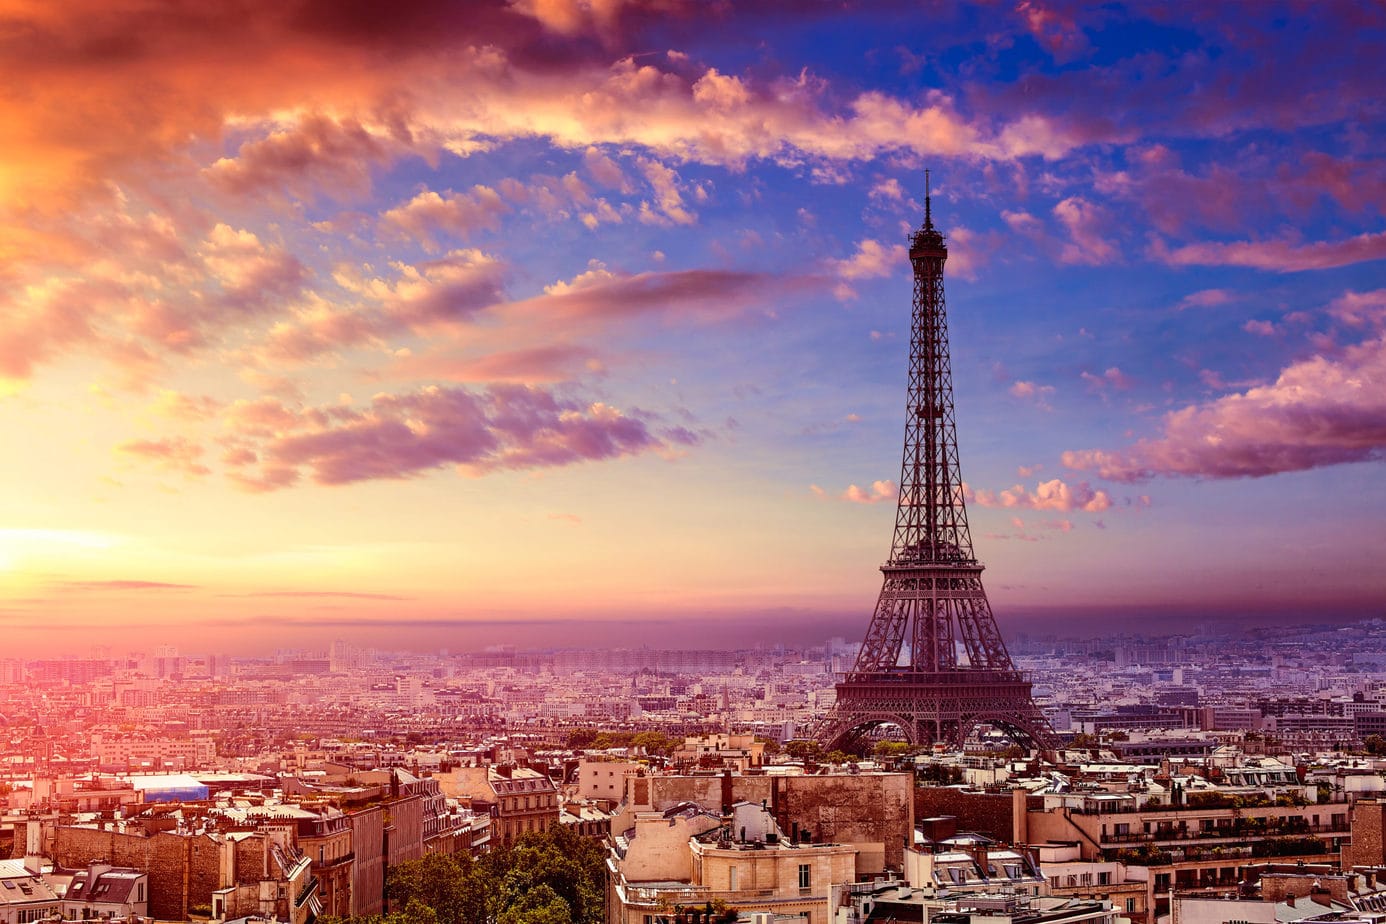 View of the eiffel tower in Paris at sunset - guide to shopping in France